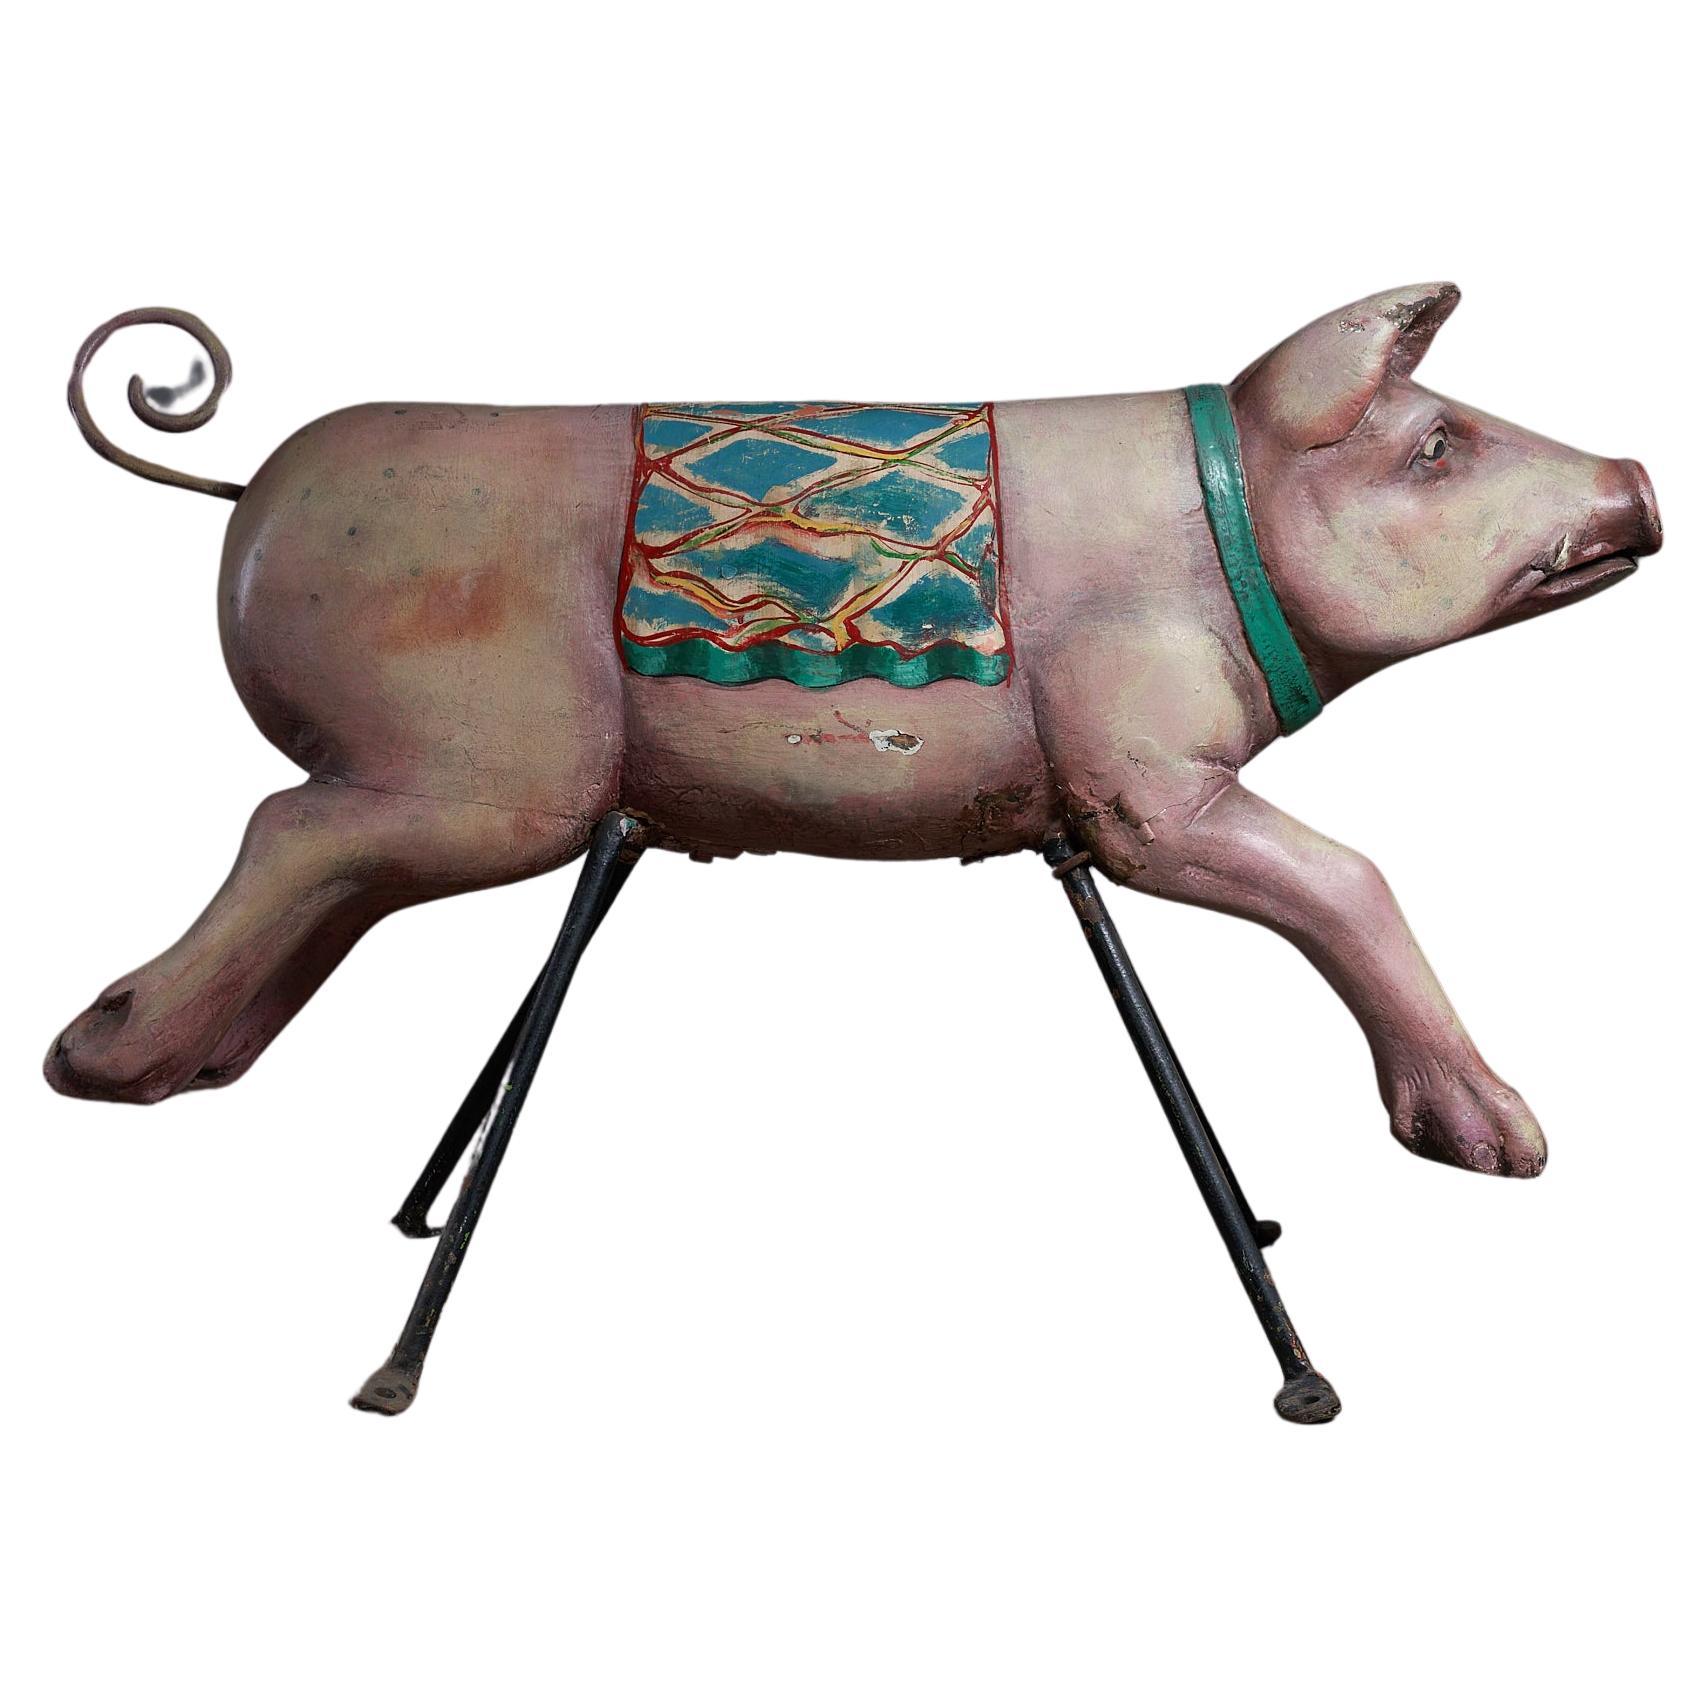 Pig Carved Wooden Carousel Figure: Antique For Sale